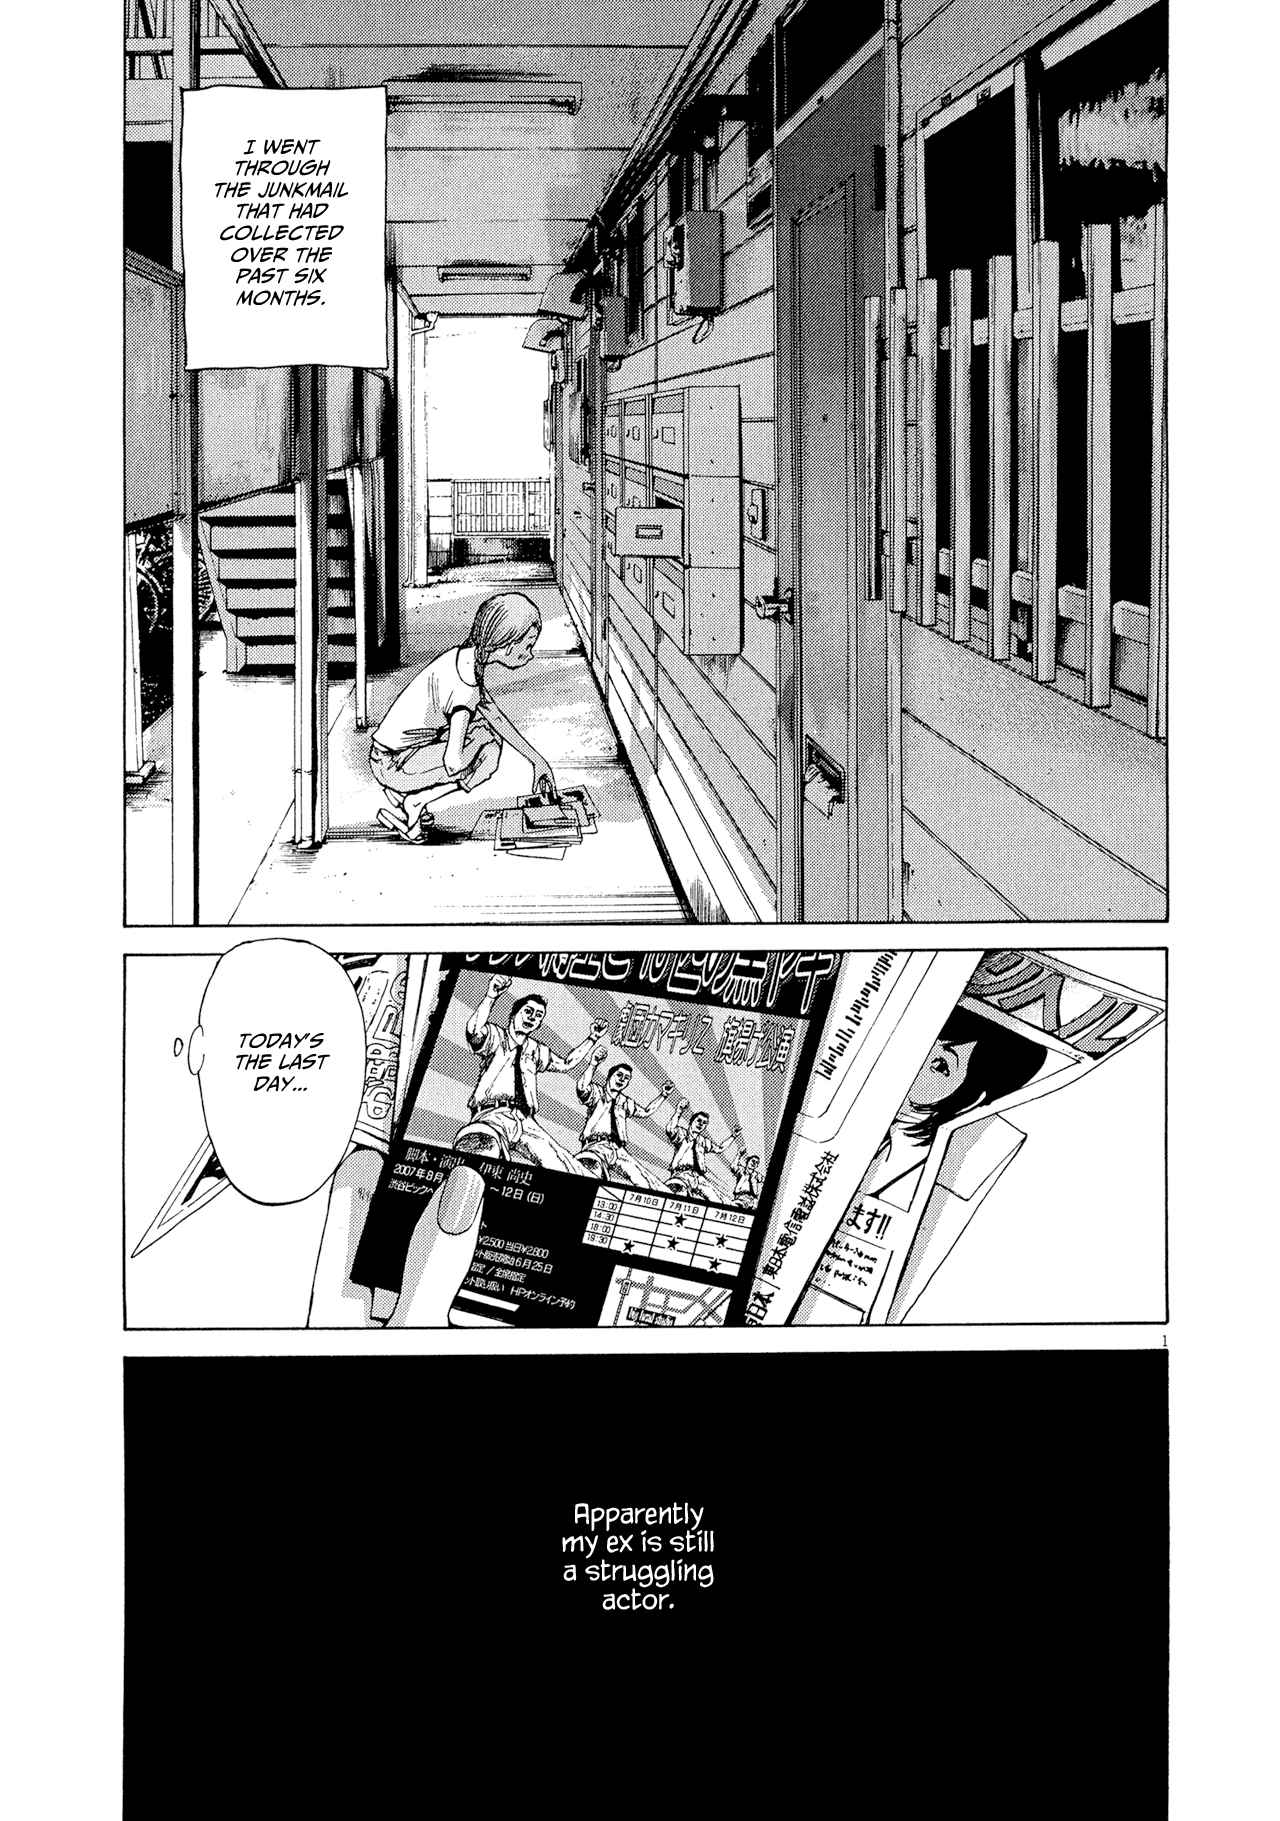 Sekai no Owari to Yoakemae Vol. 1 Ch. 7 How to Spend a Day Off